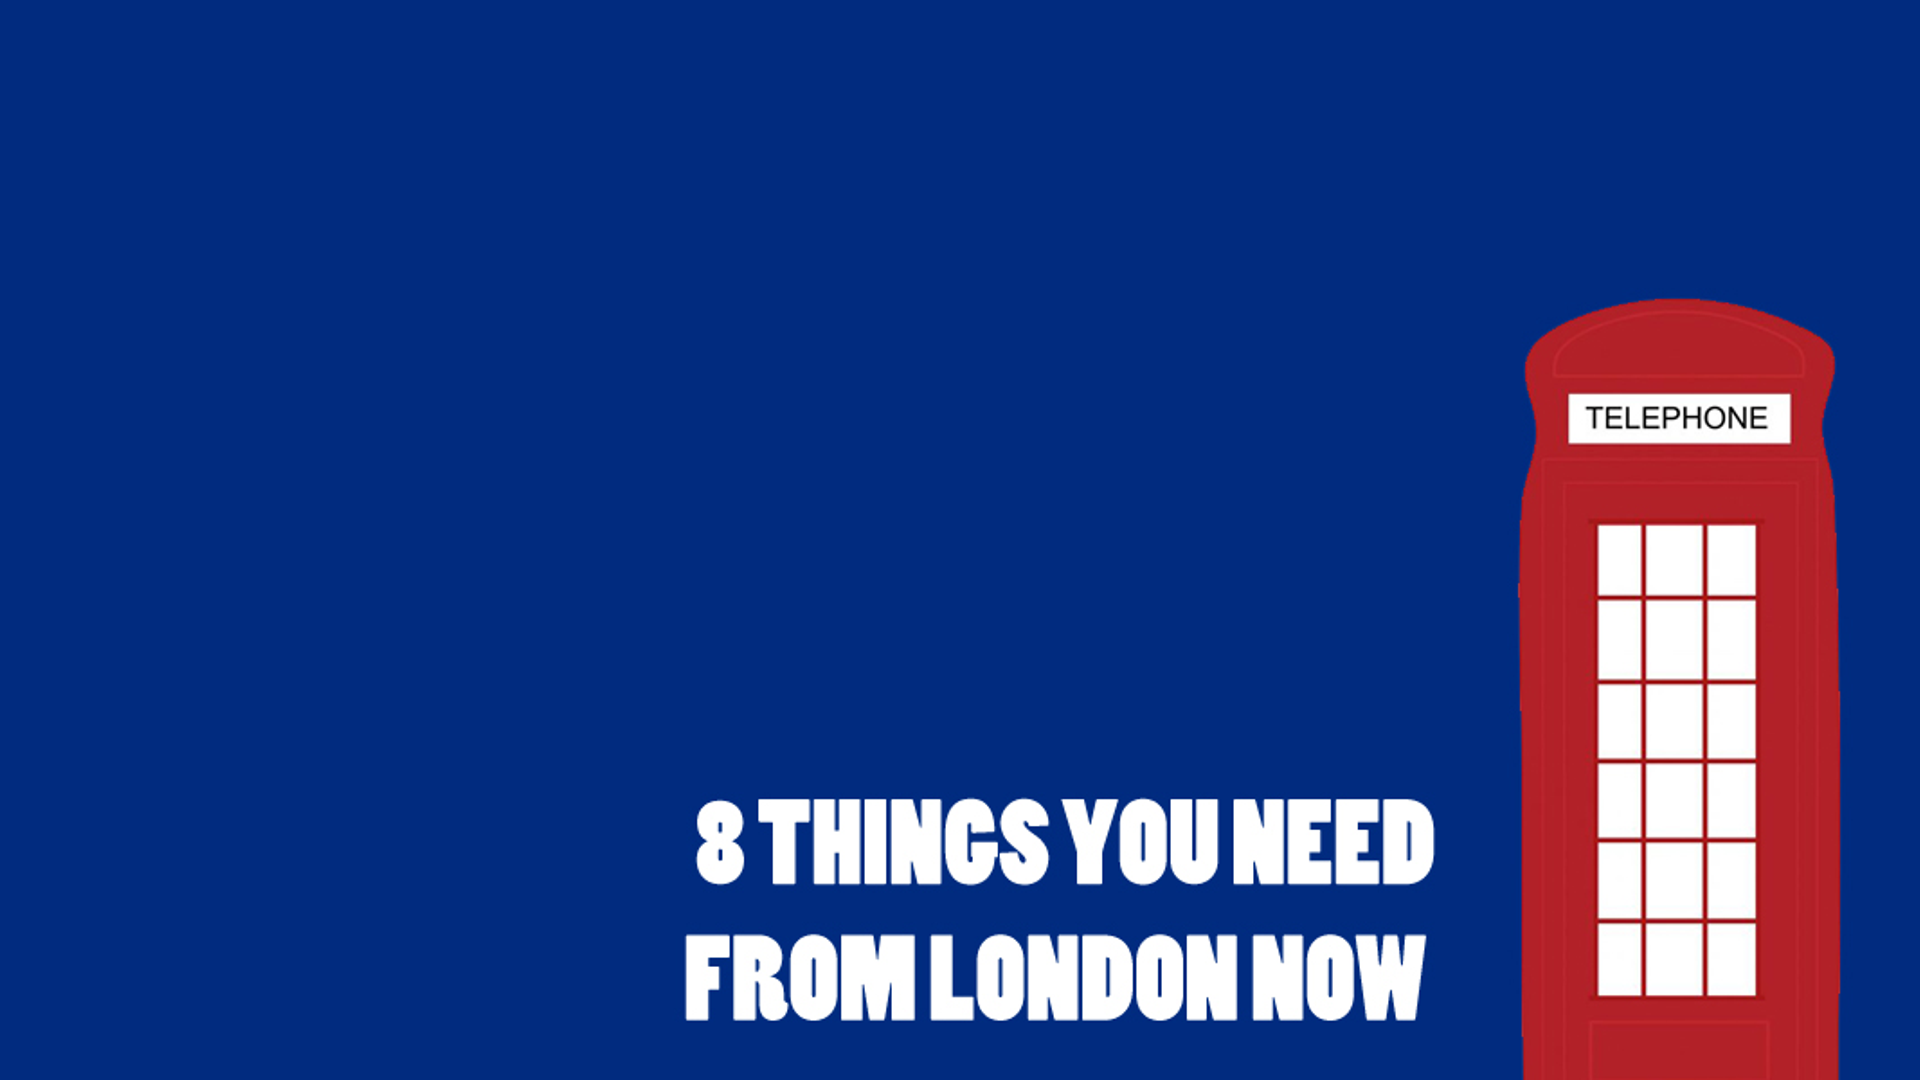 Featured image for 8 Things You Need From London Now